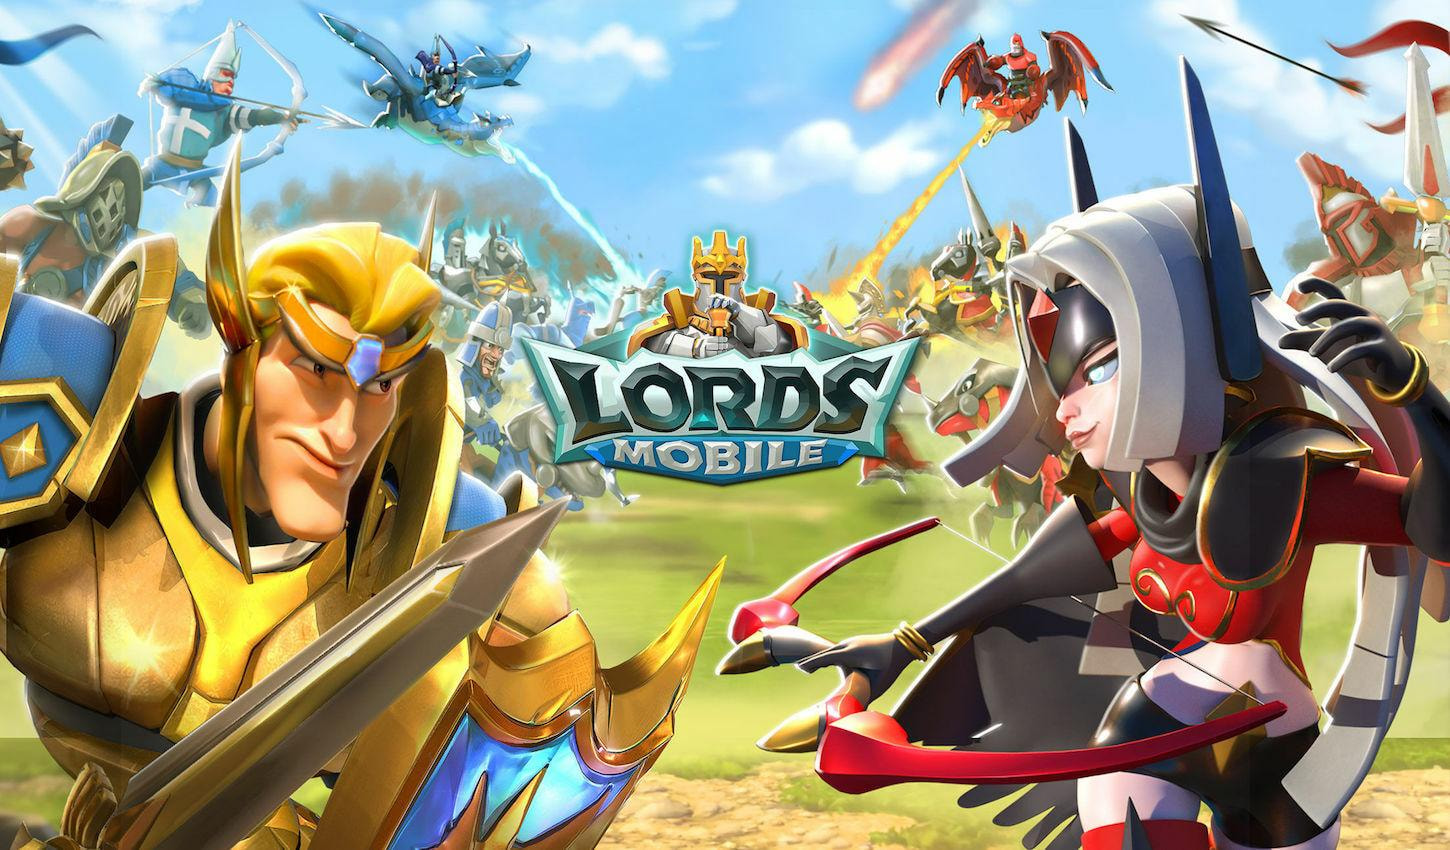 Download do APK de Lords Mobile para Android